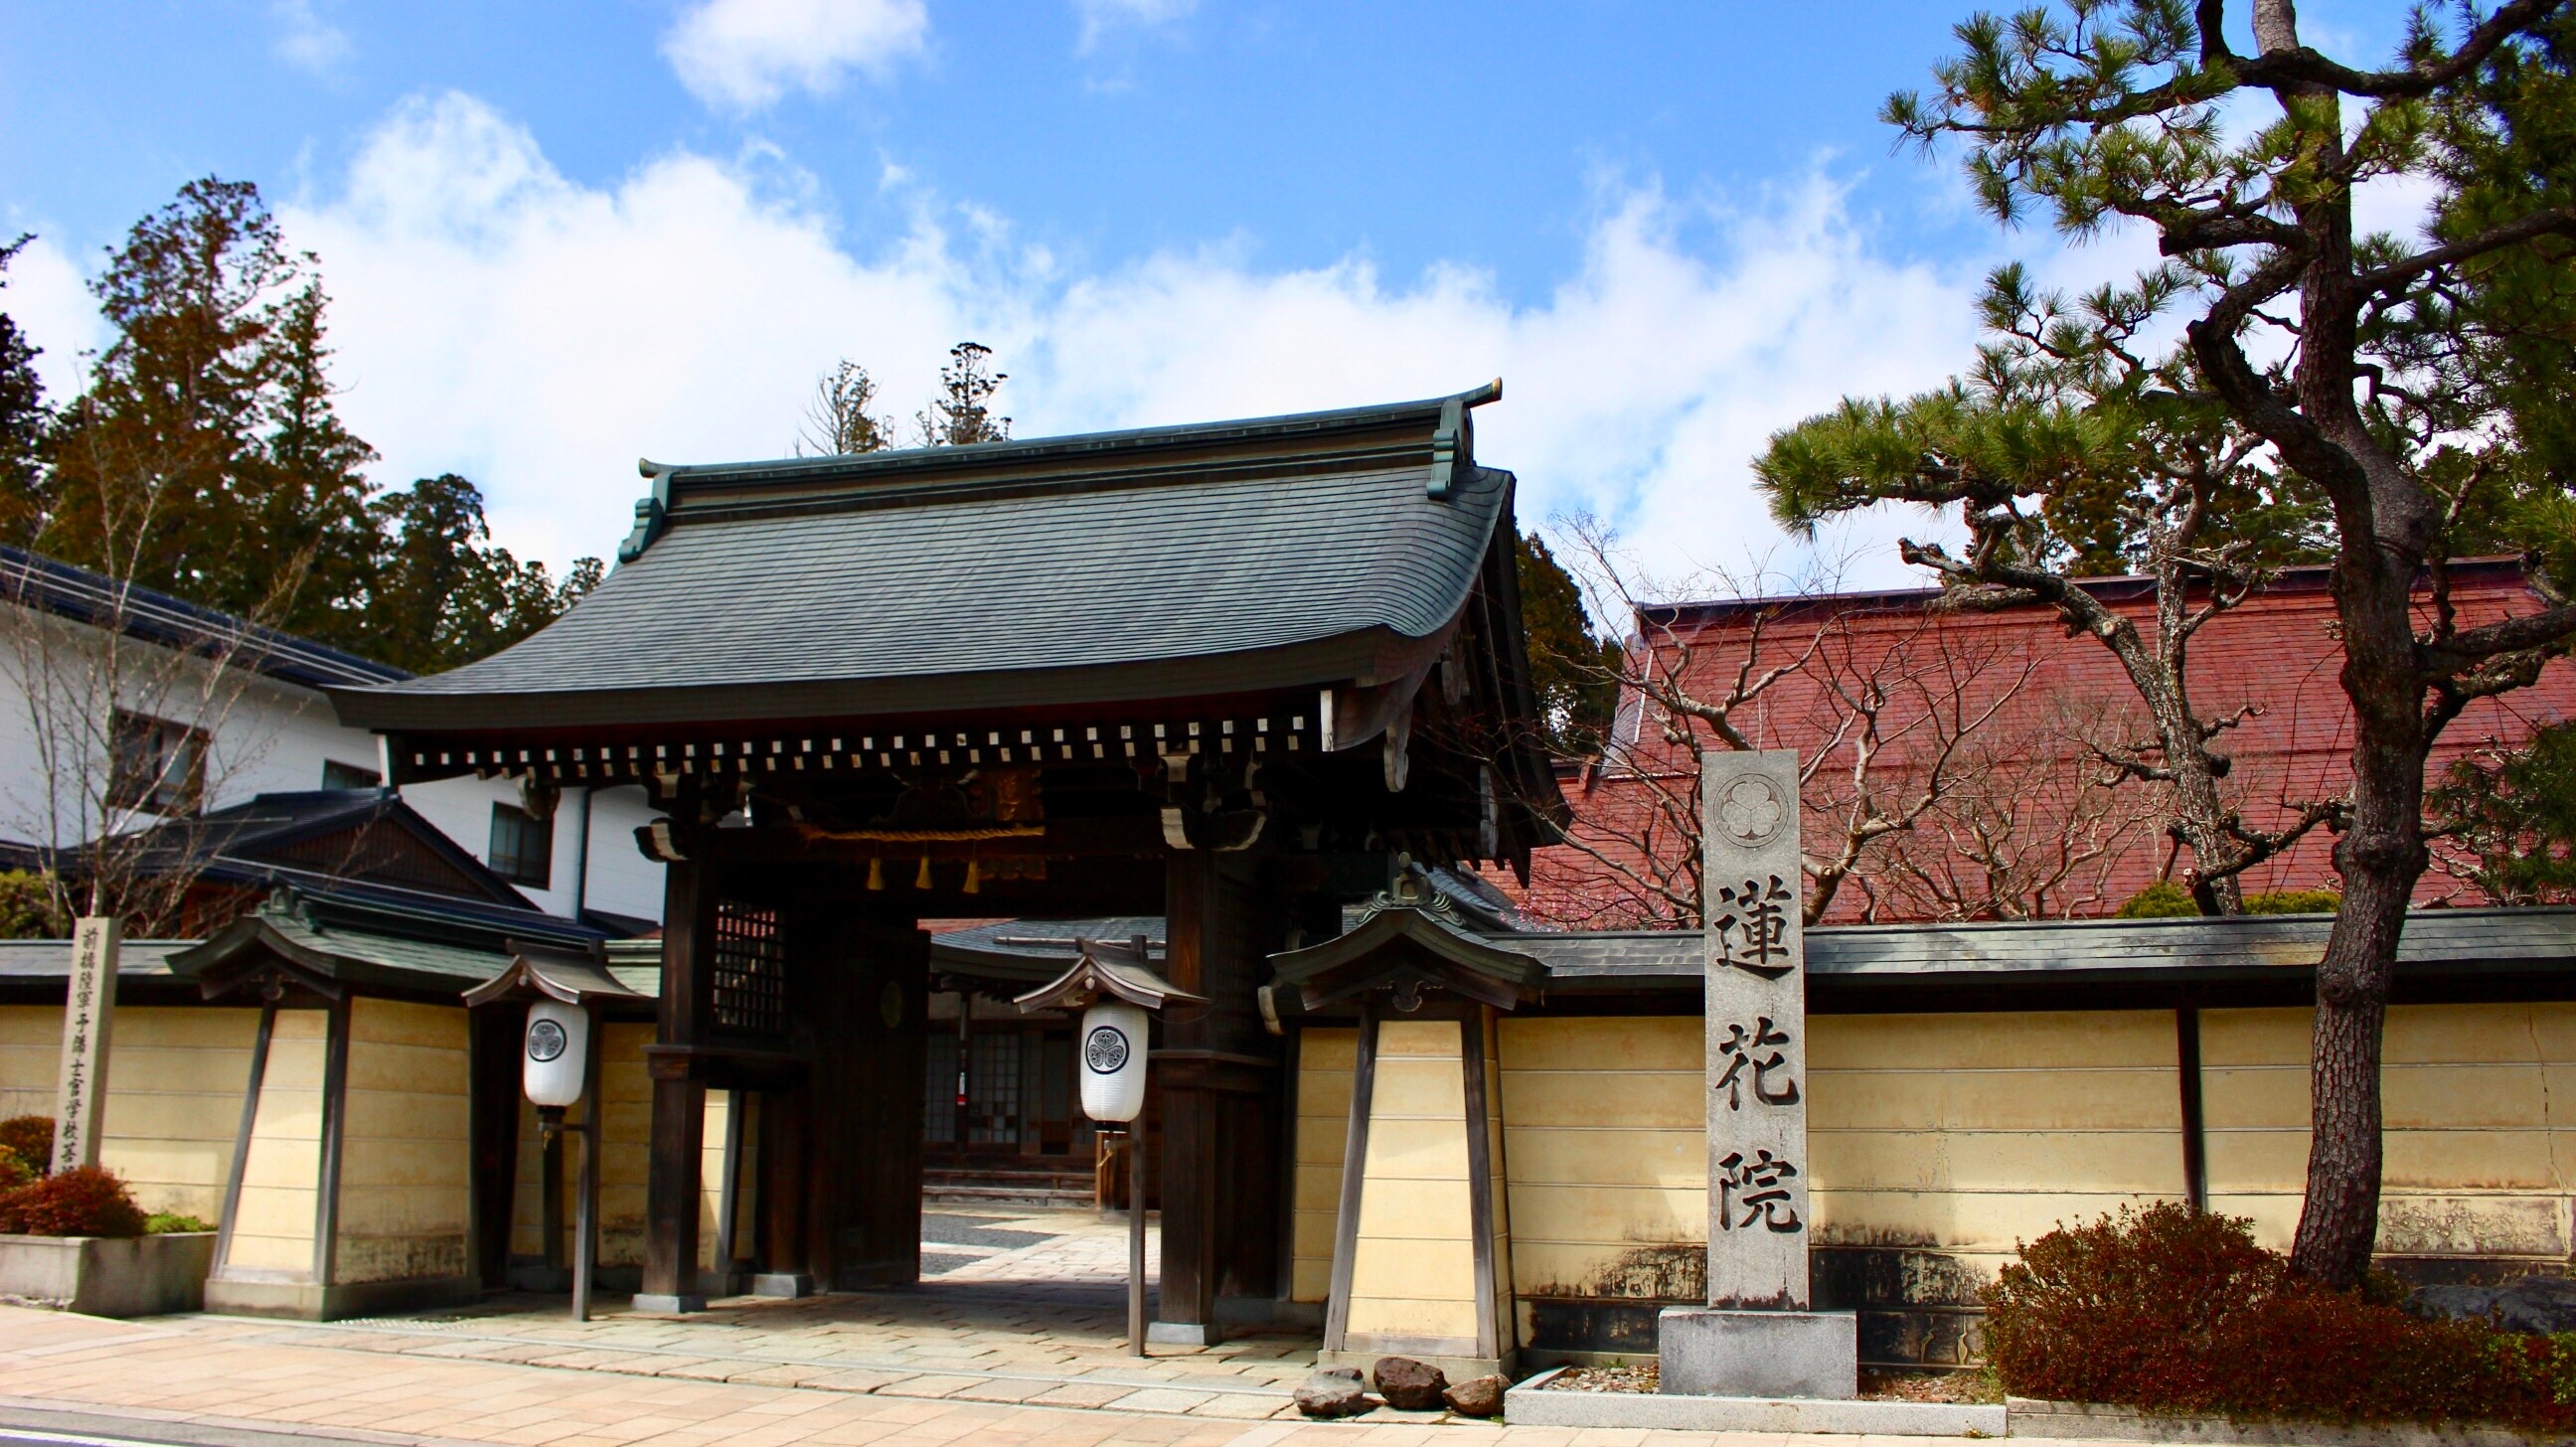 Appearance Our hospital located in the center of Mt. Koya